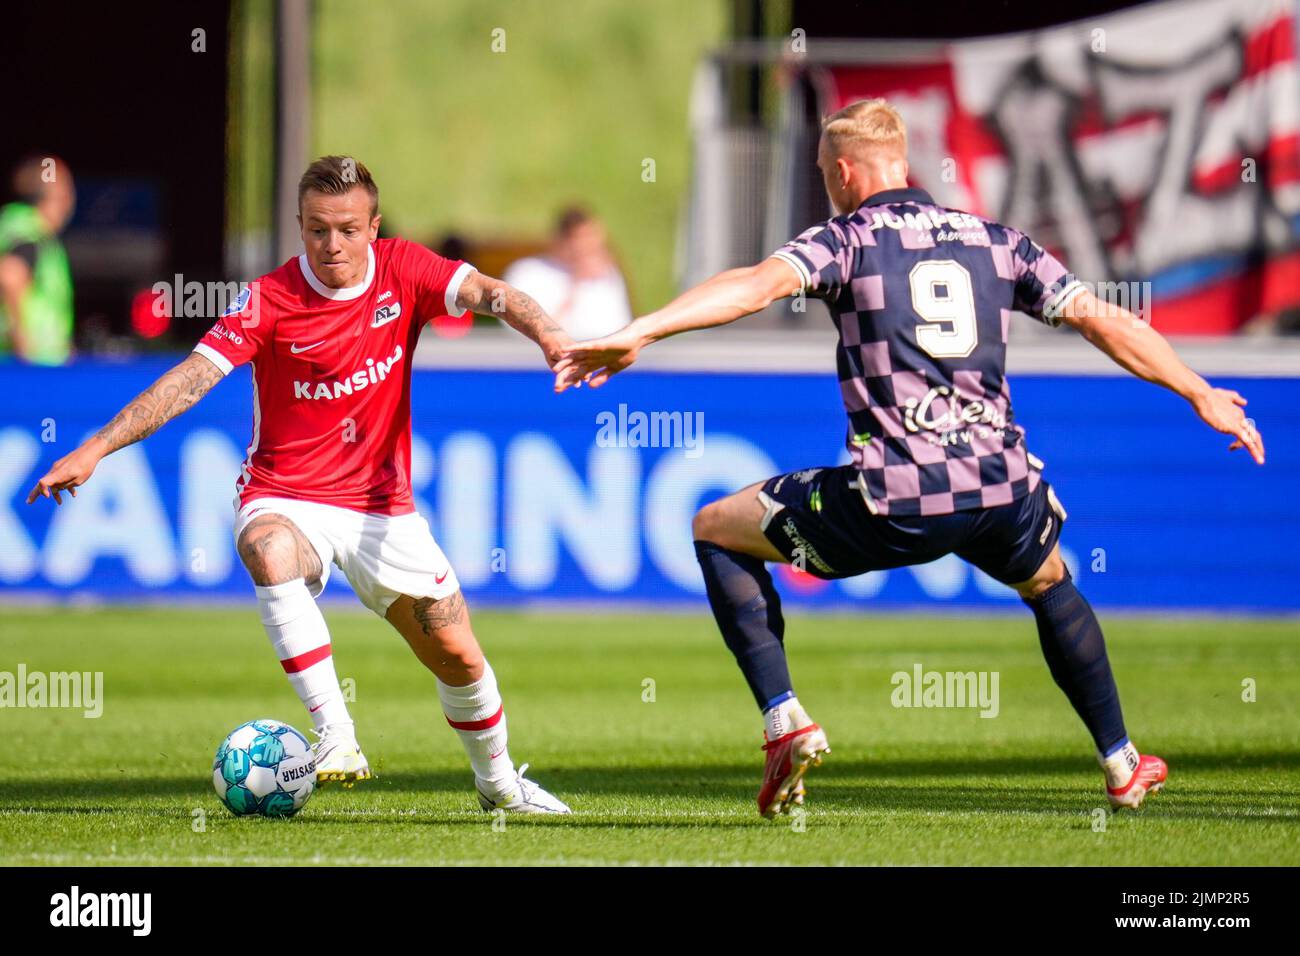 ALKMAAR, NETHERLANDS - AUGUST 7: Jordy Clasie of AZ Alkmaar battles for the ball with Isac Lidberg of Go Ahead Eagles during the Dutch Eredivisie match between AZ Alkmaar and Go Ahead Eagles at the AFAS Stadion on August 7, 2022 in Alkmaar, Netherlands (Photo by Patrick Goosen/Orange Pictures) Stock Photo